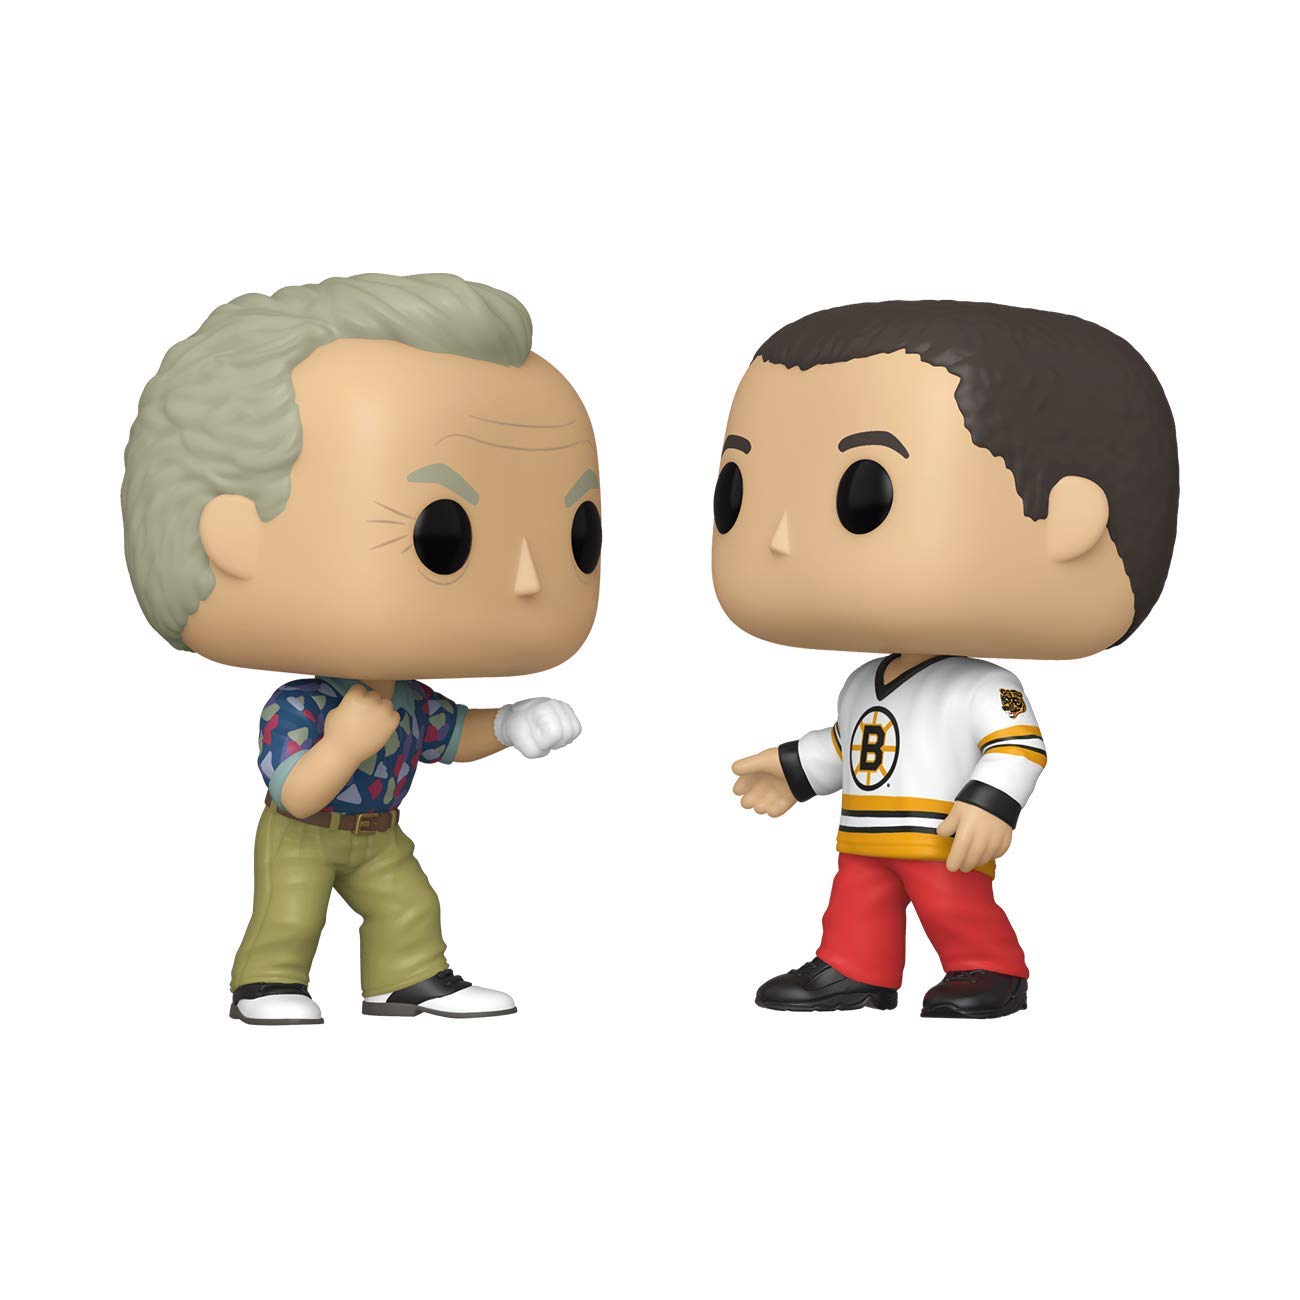 Funko POP! Movies: Happy Gilmore - Happy and B.Barker 2-Pack